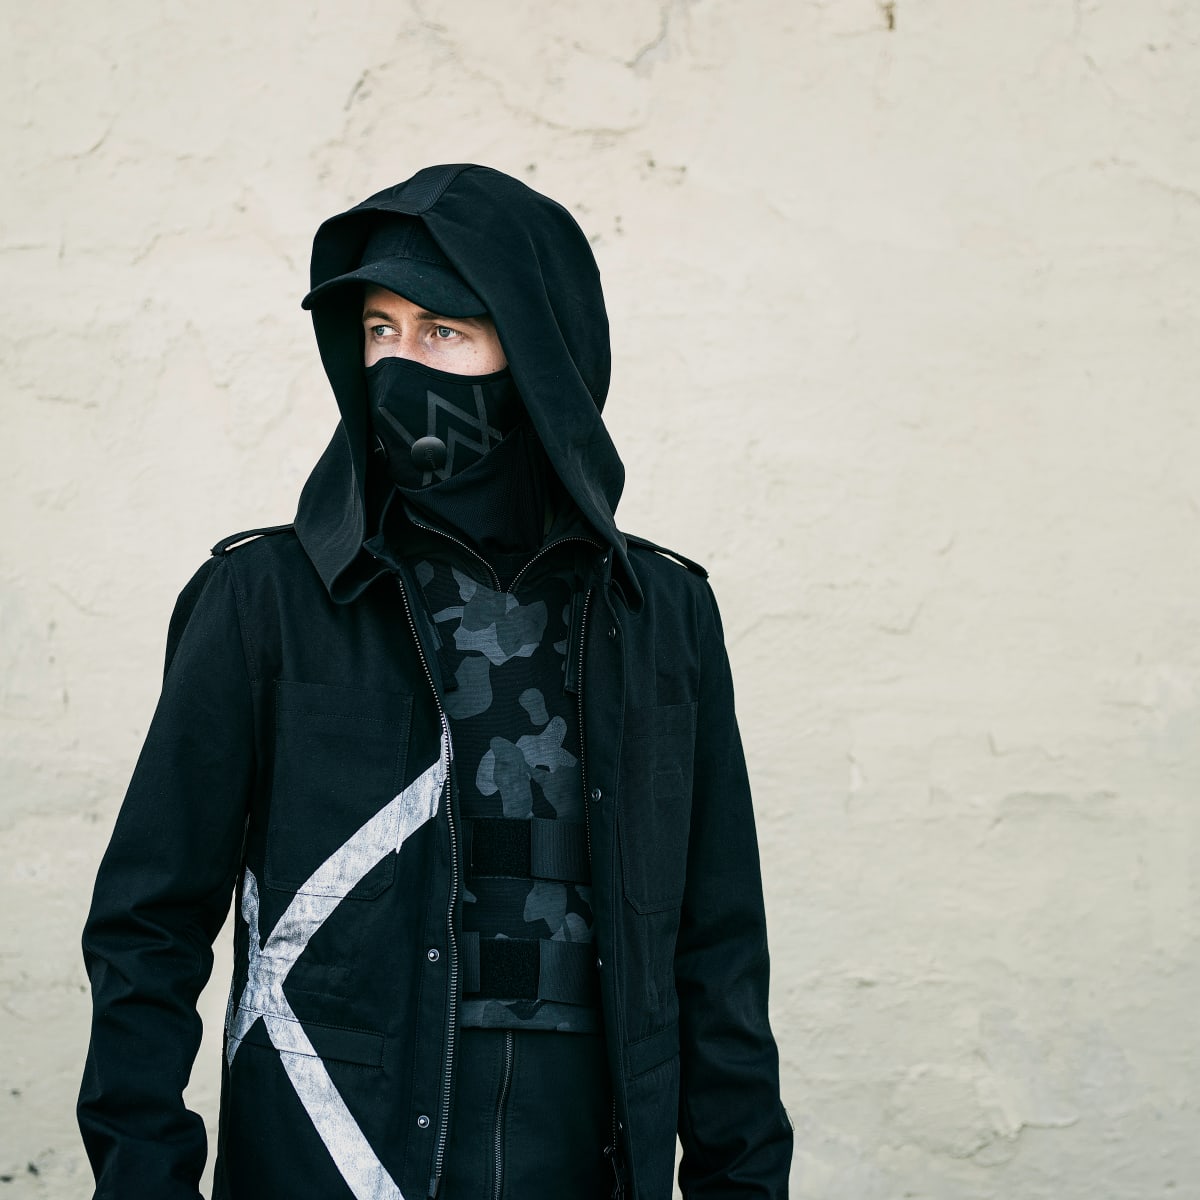 Alan Walker K 391 Tungevaag And Mangoo Form An Unstoppable Team For Play On Liquid State Edm Com The Latest Electronic Dance Music News Reviews Artists